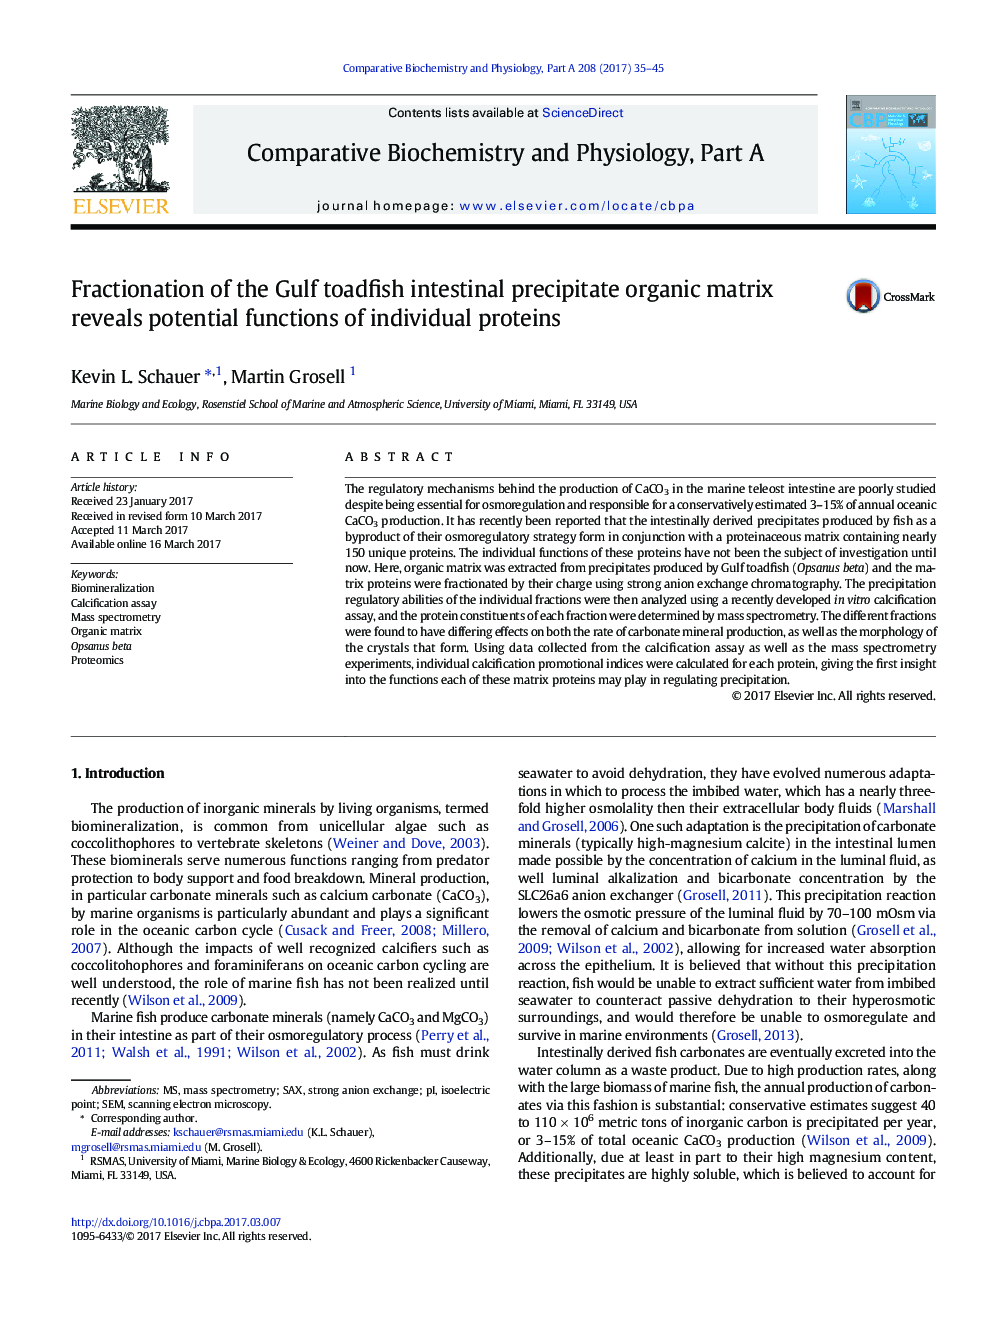 Fractionation of the Gulf toadfish intestinal precipitate organic matrix reveals potential functions of individual proteins